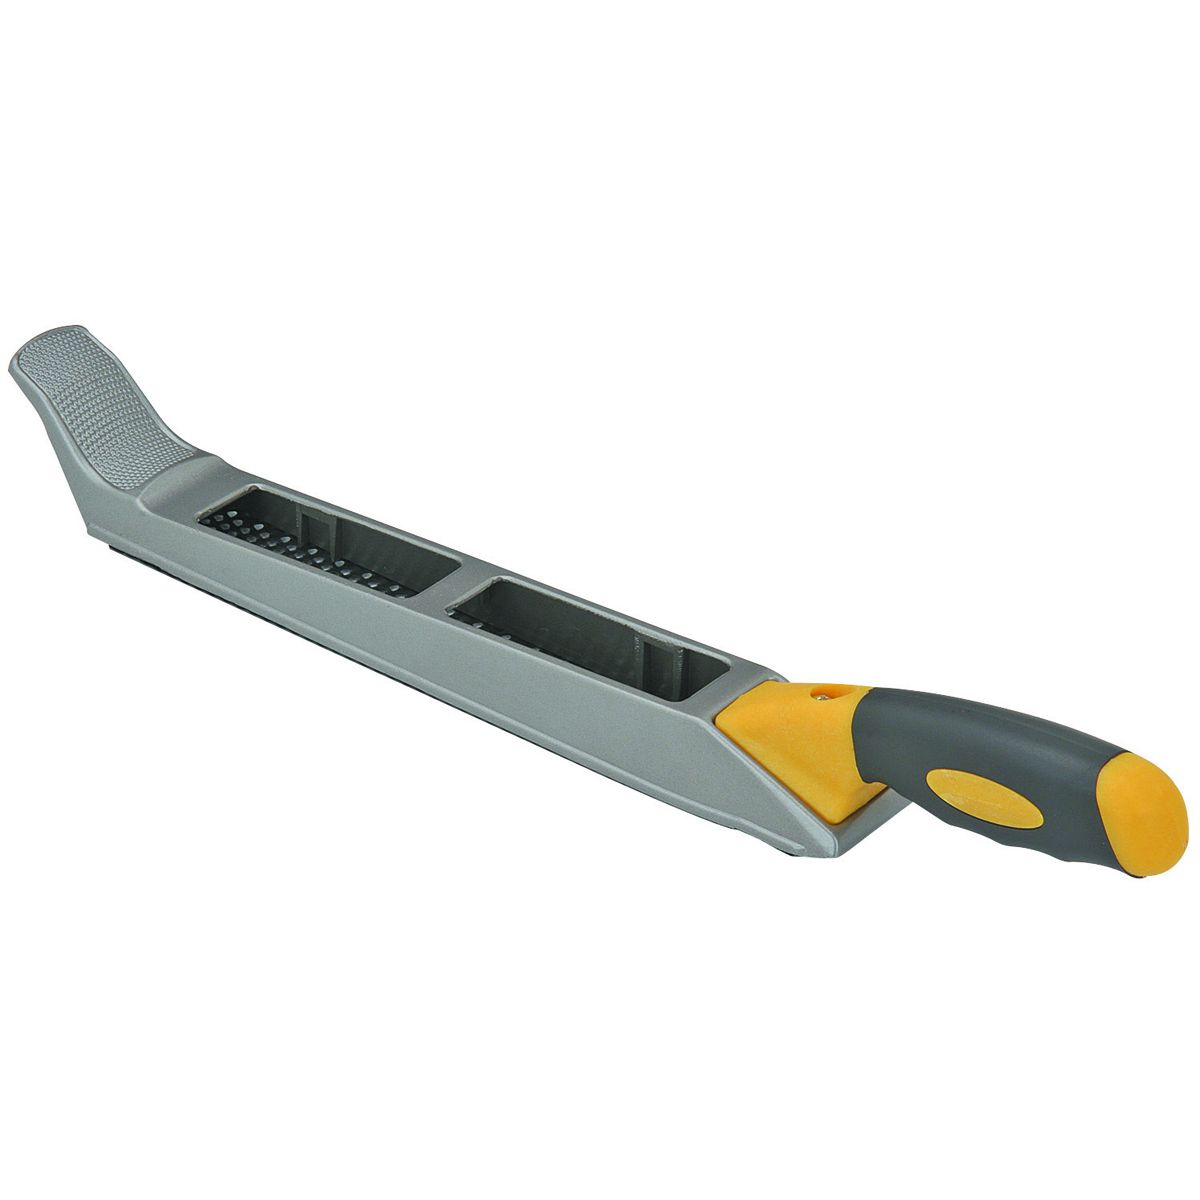 CENTRAL FORGE 10 in. Two-Way Combination Rasp Plane